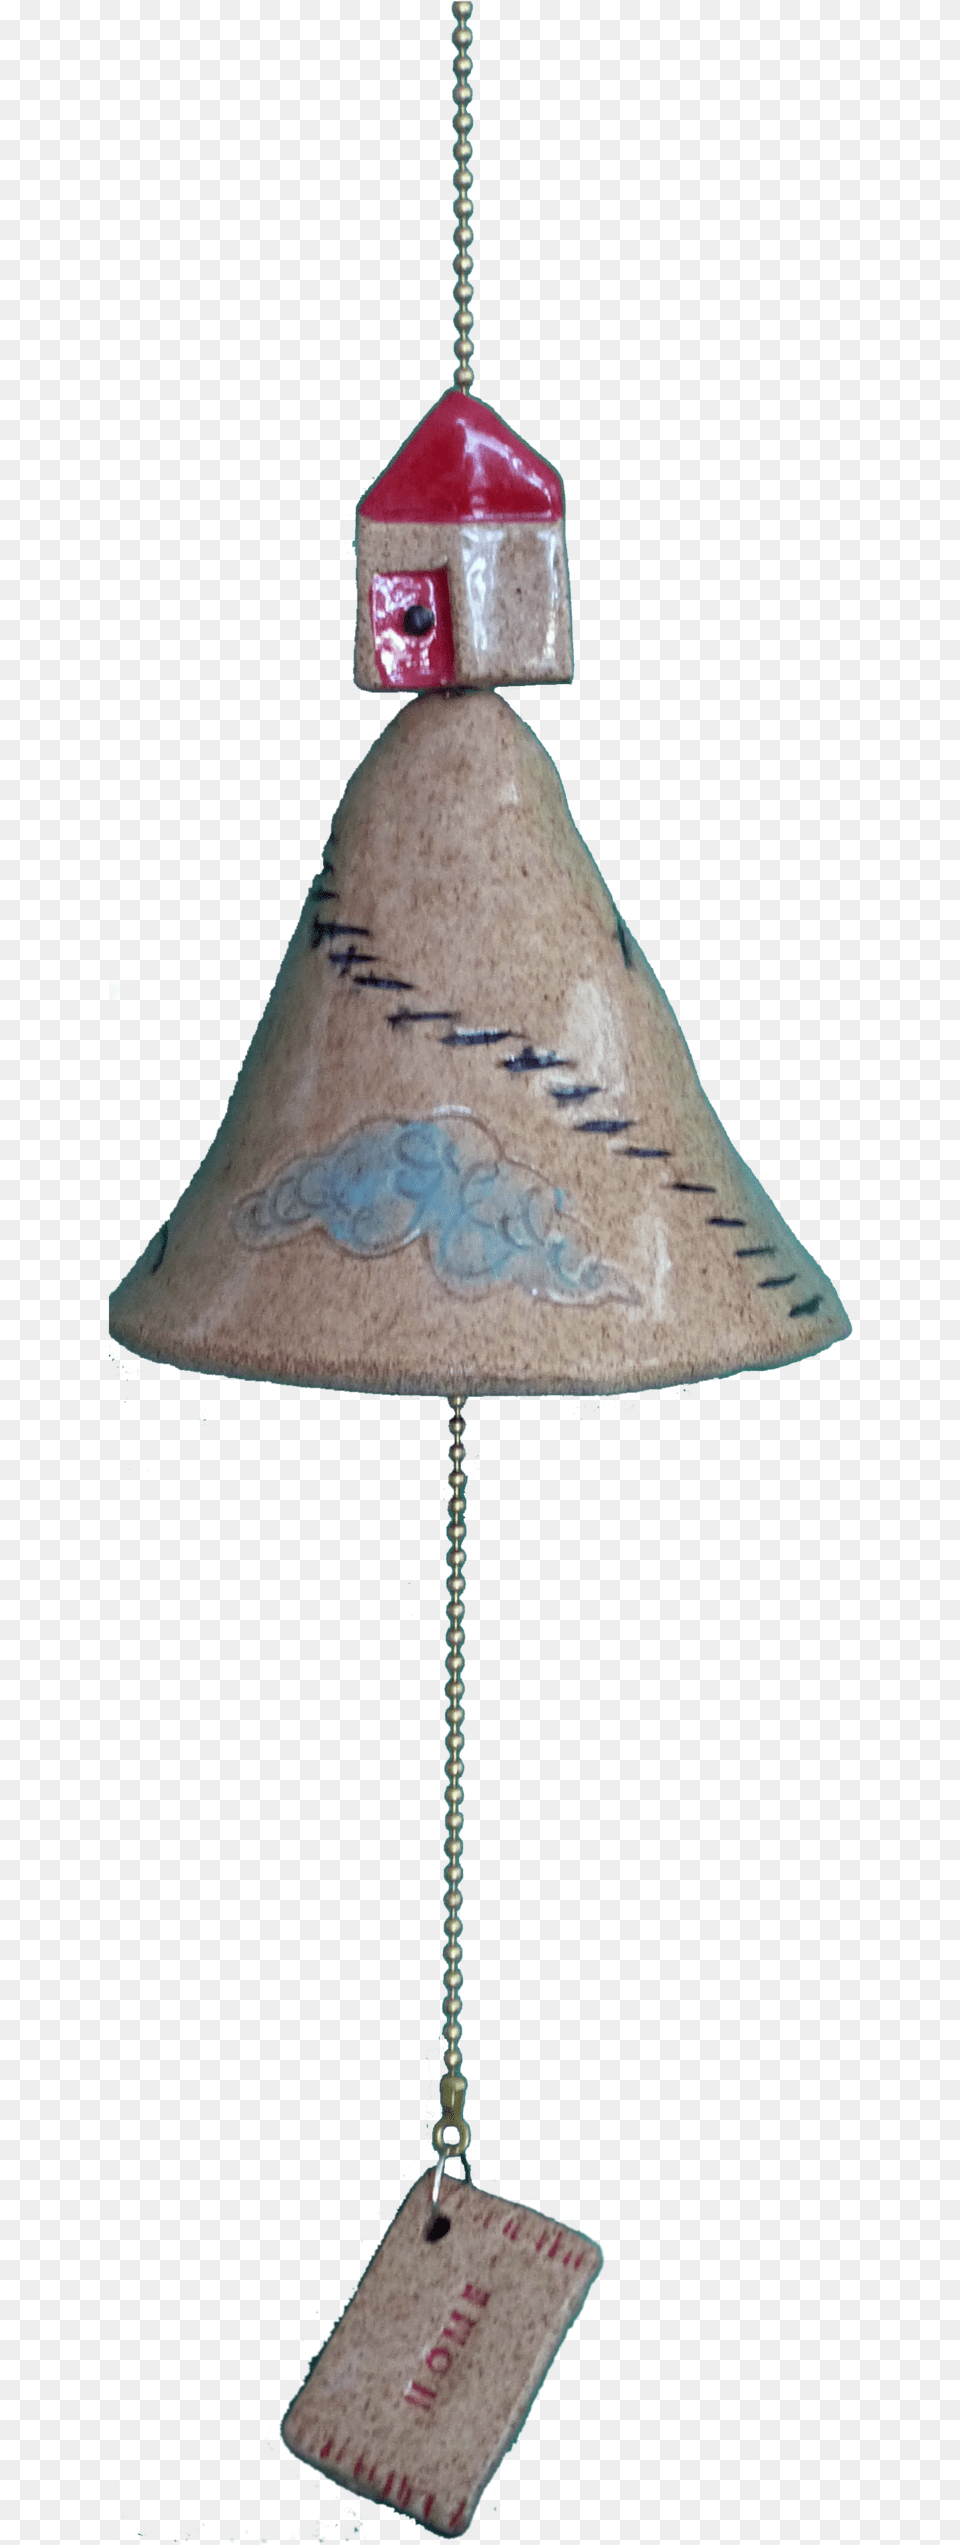 The Quotdoor Bell Lampshade, Lamp Free Transparent Png